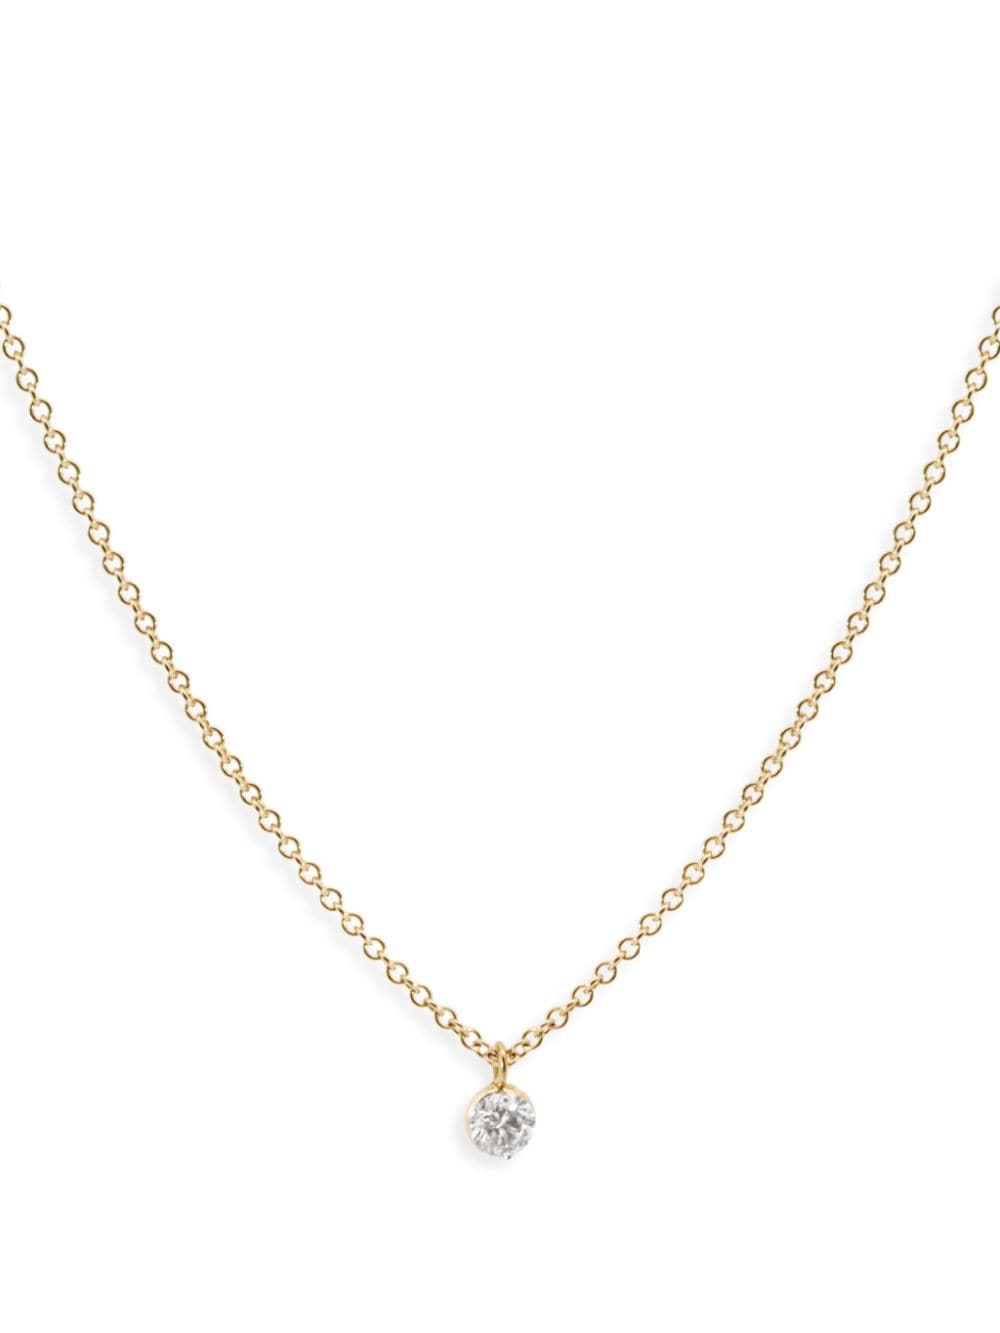 The Alkemistry 18kt Yellow Gold Diamond Chain Necklace